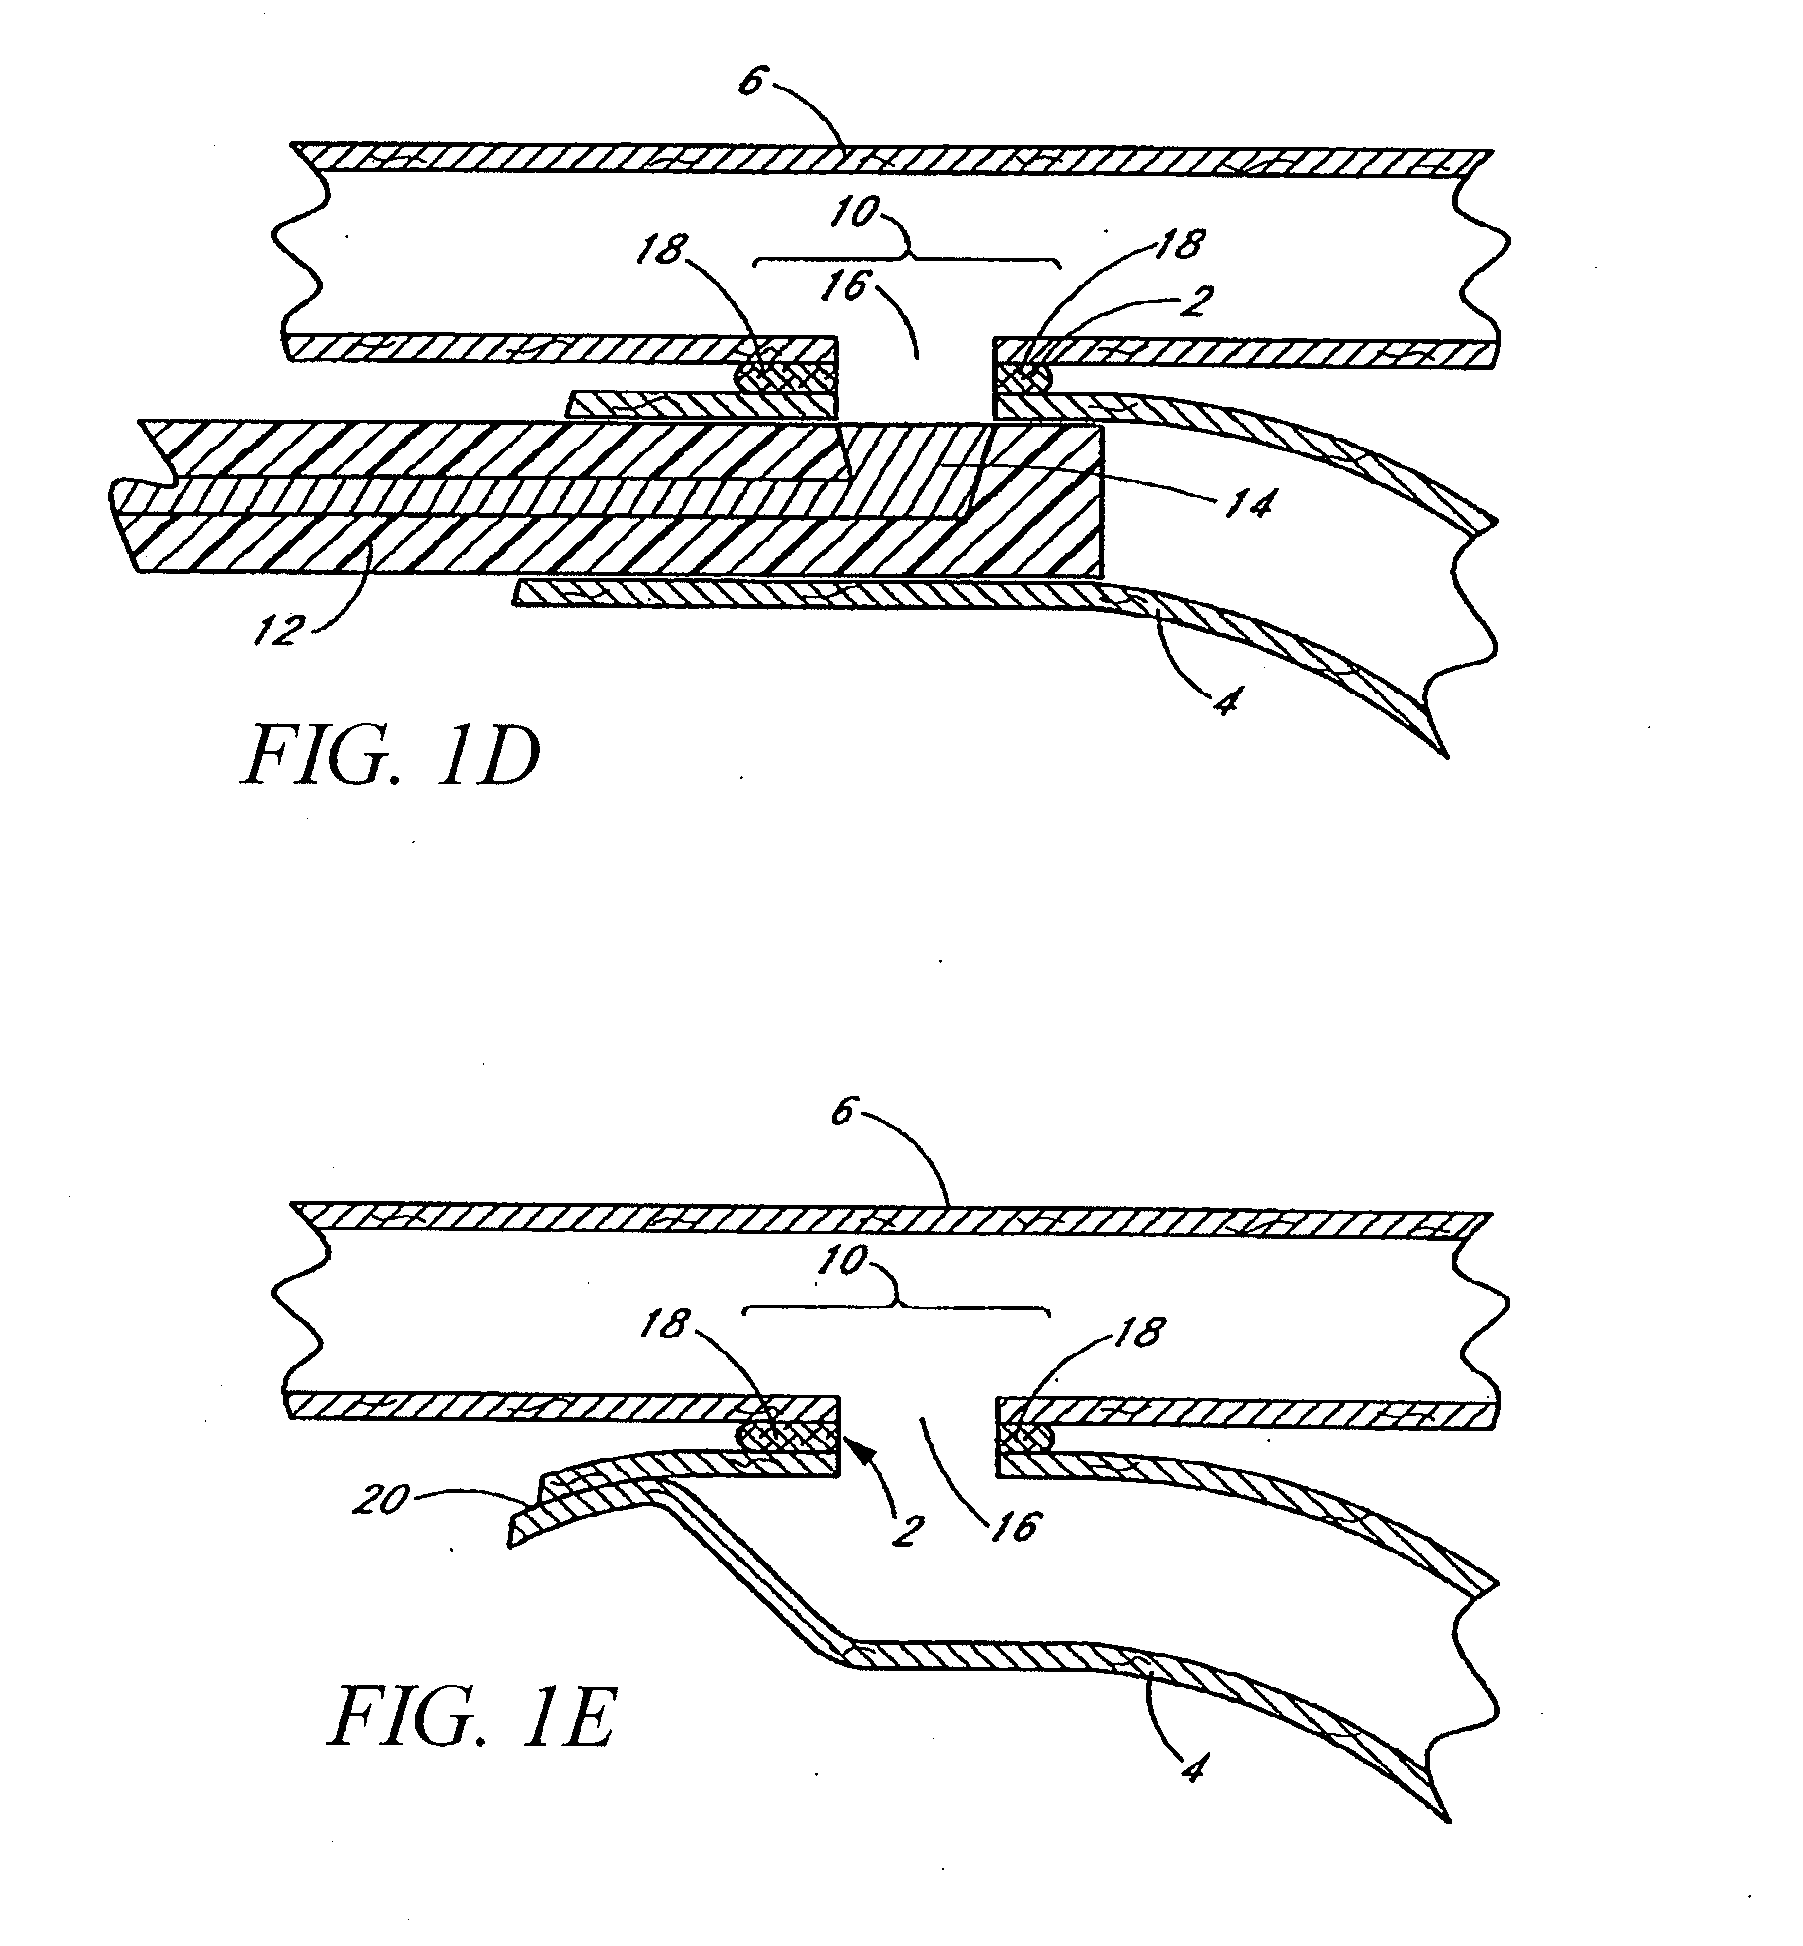 Apparatus and method for performing laser-assisted vascular anastomoses using bioglue